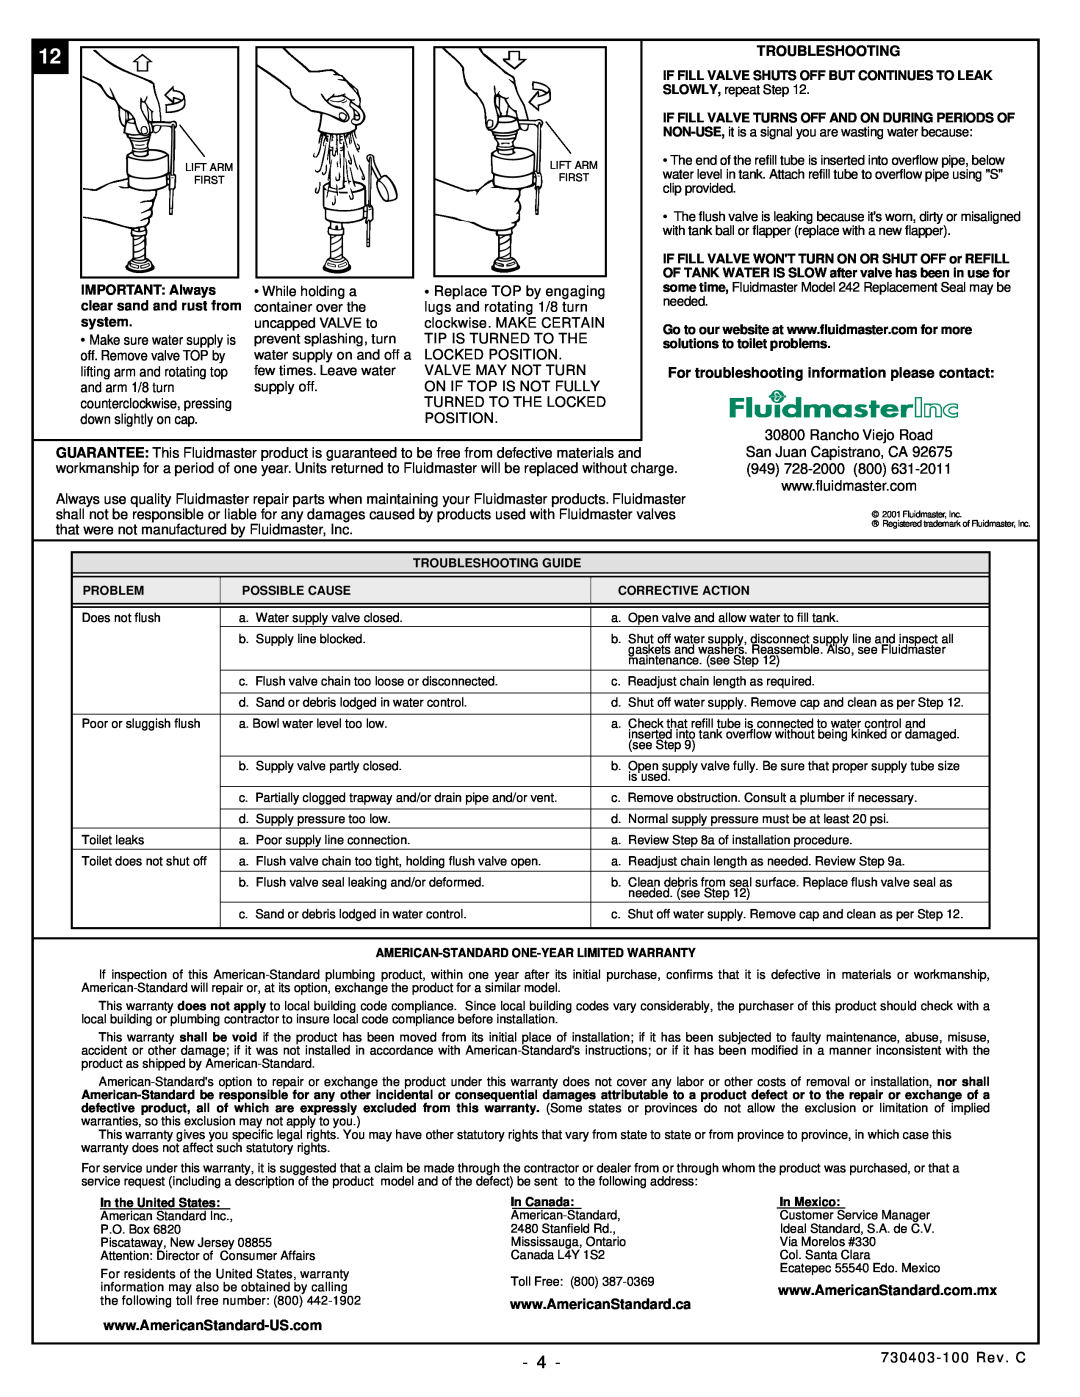 American Standard 2037.100 installation instructions Troubleshooting, For troubleshooting information please contact 